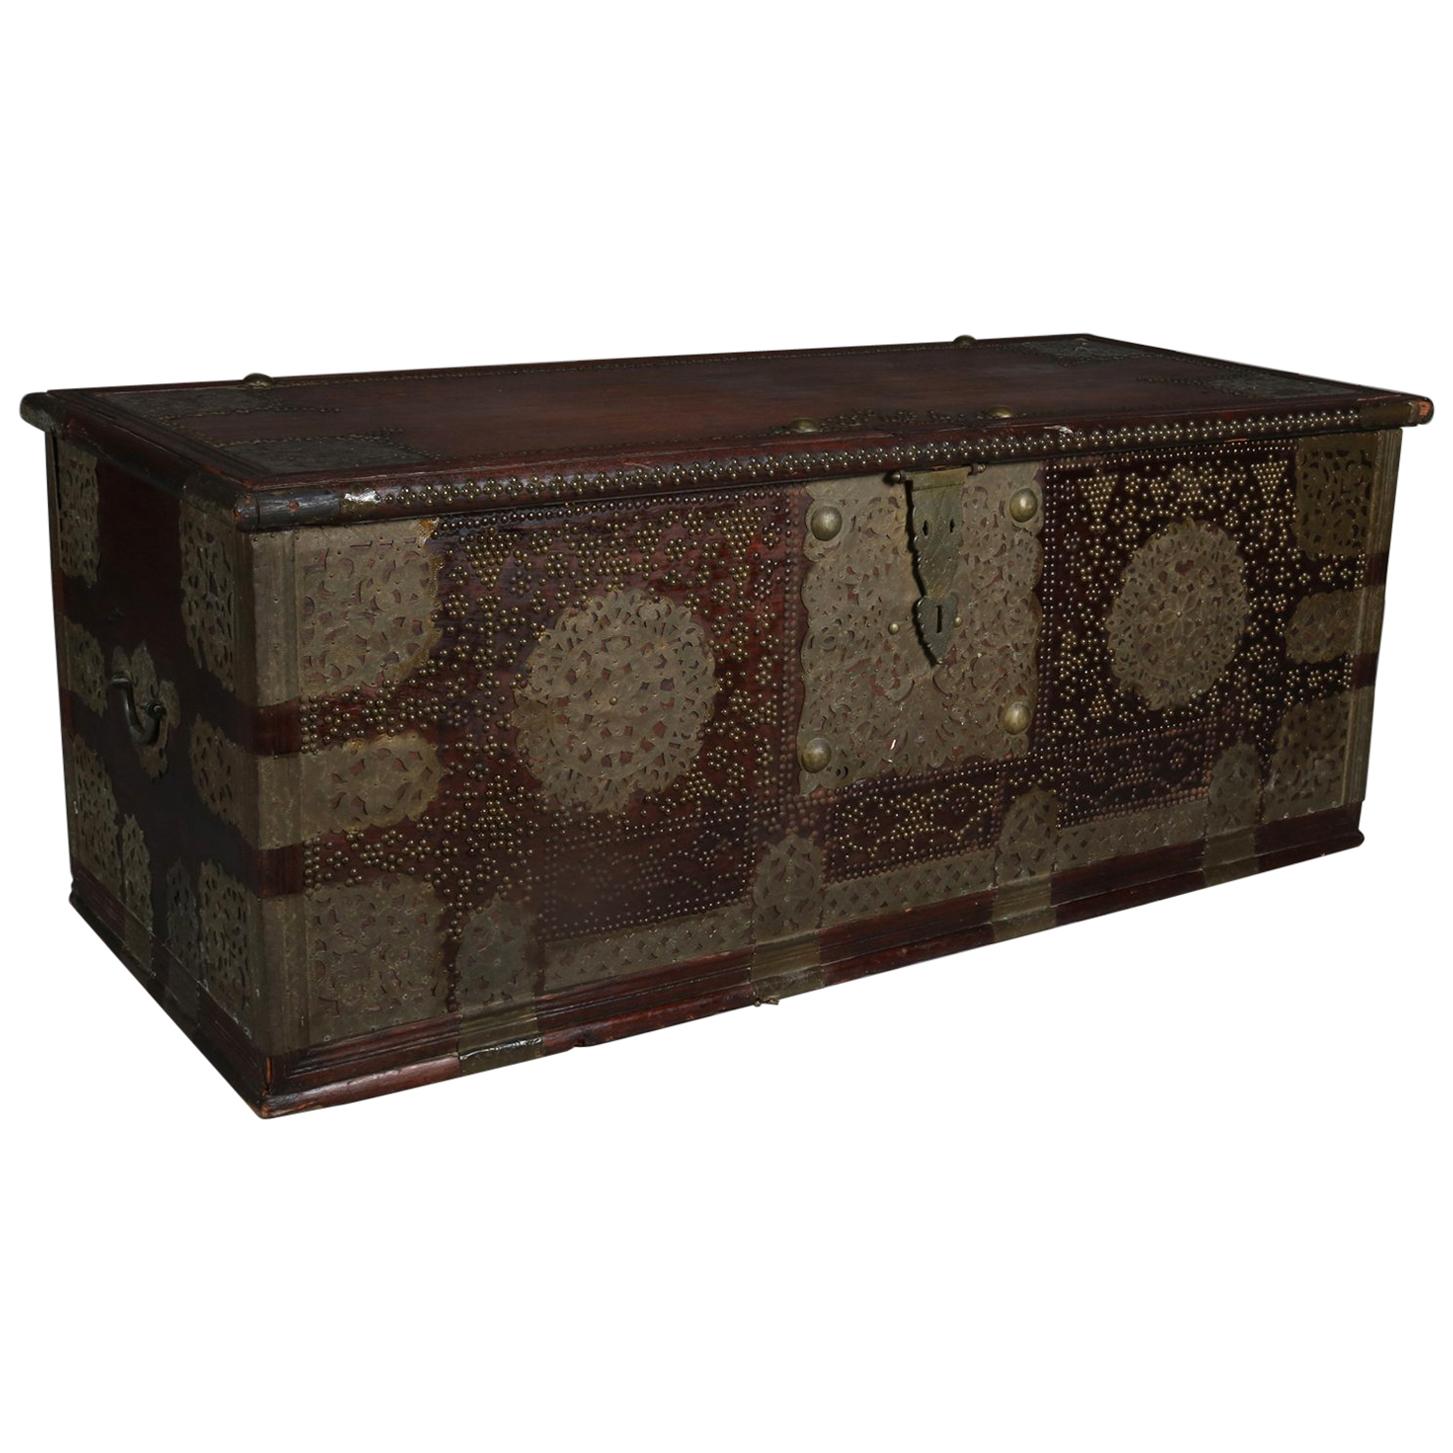 Antique Rosewood and Brass Turkish Marital Groom's Trunk, Early 19th Century